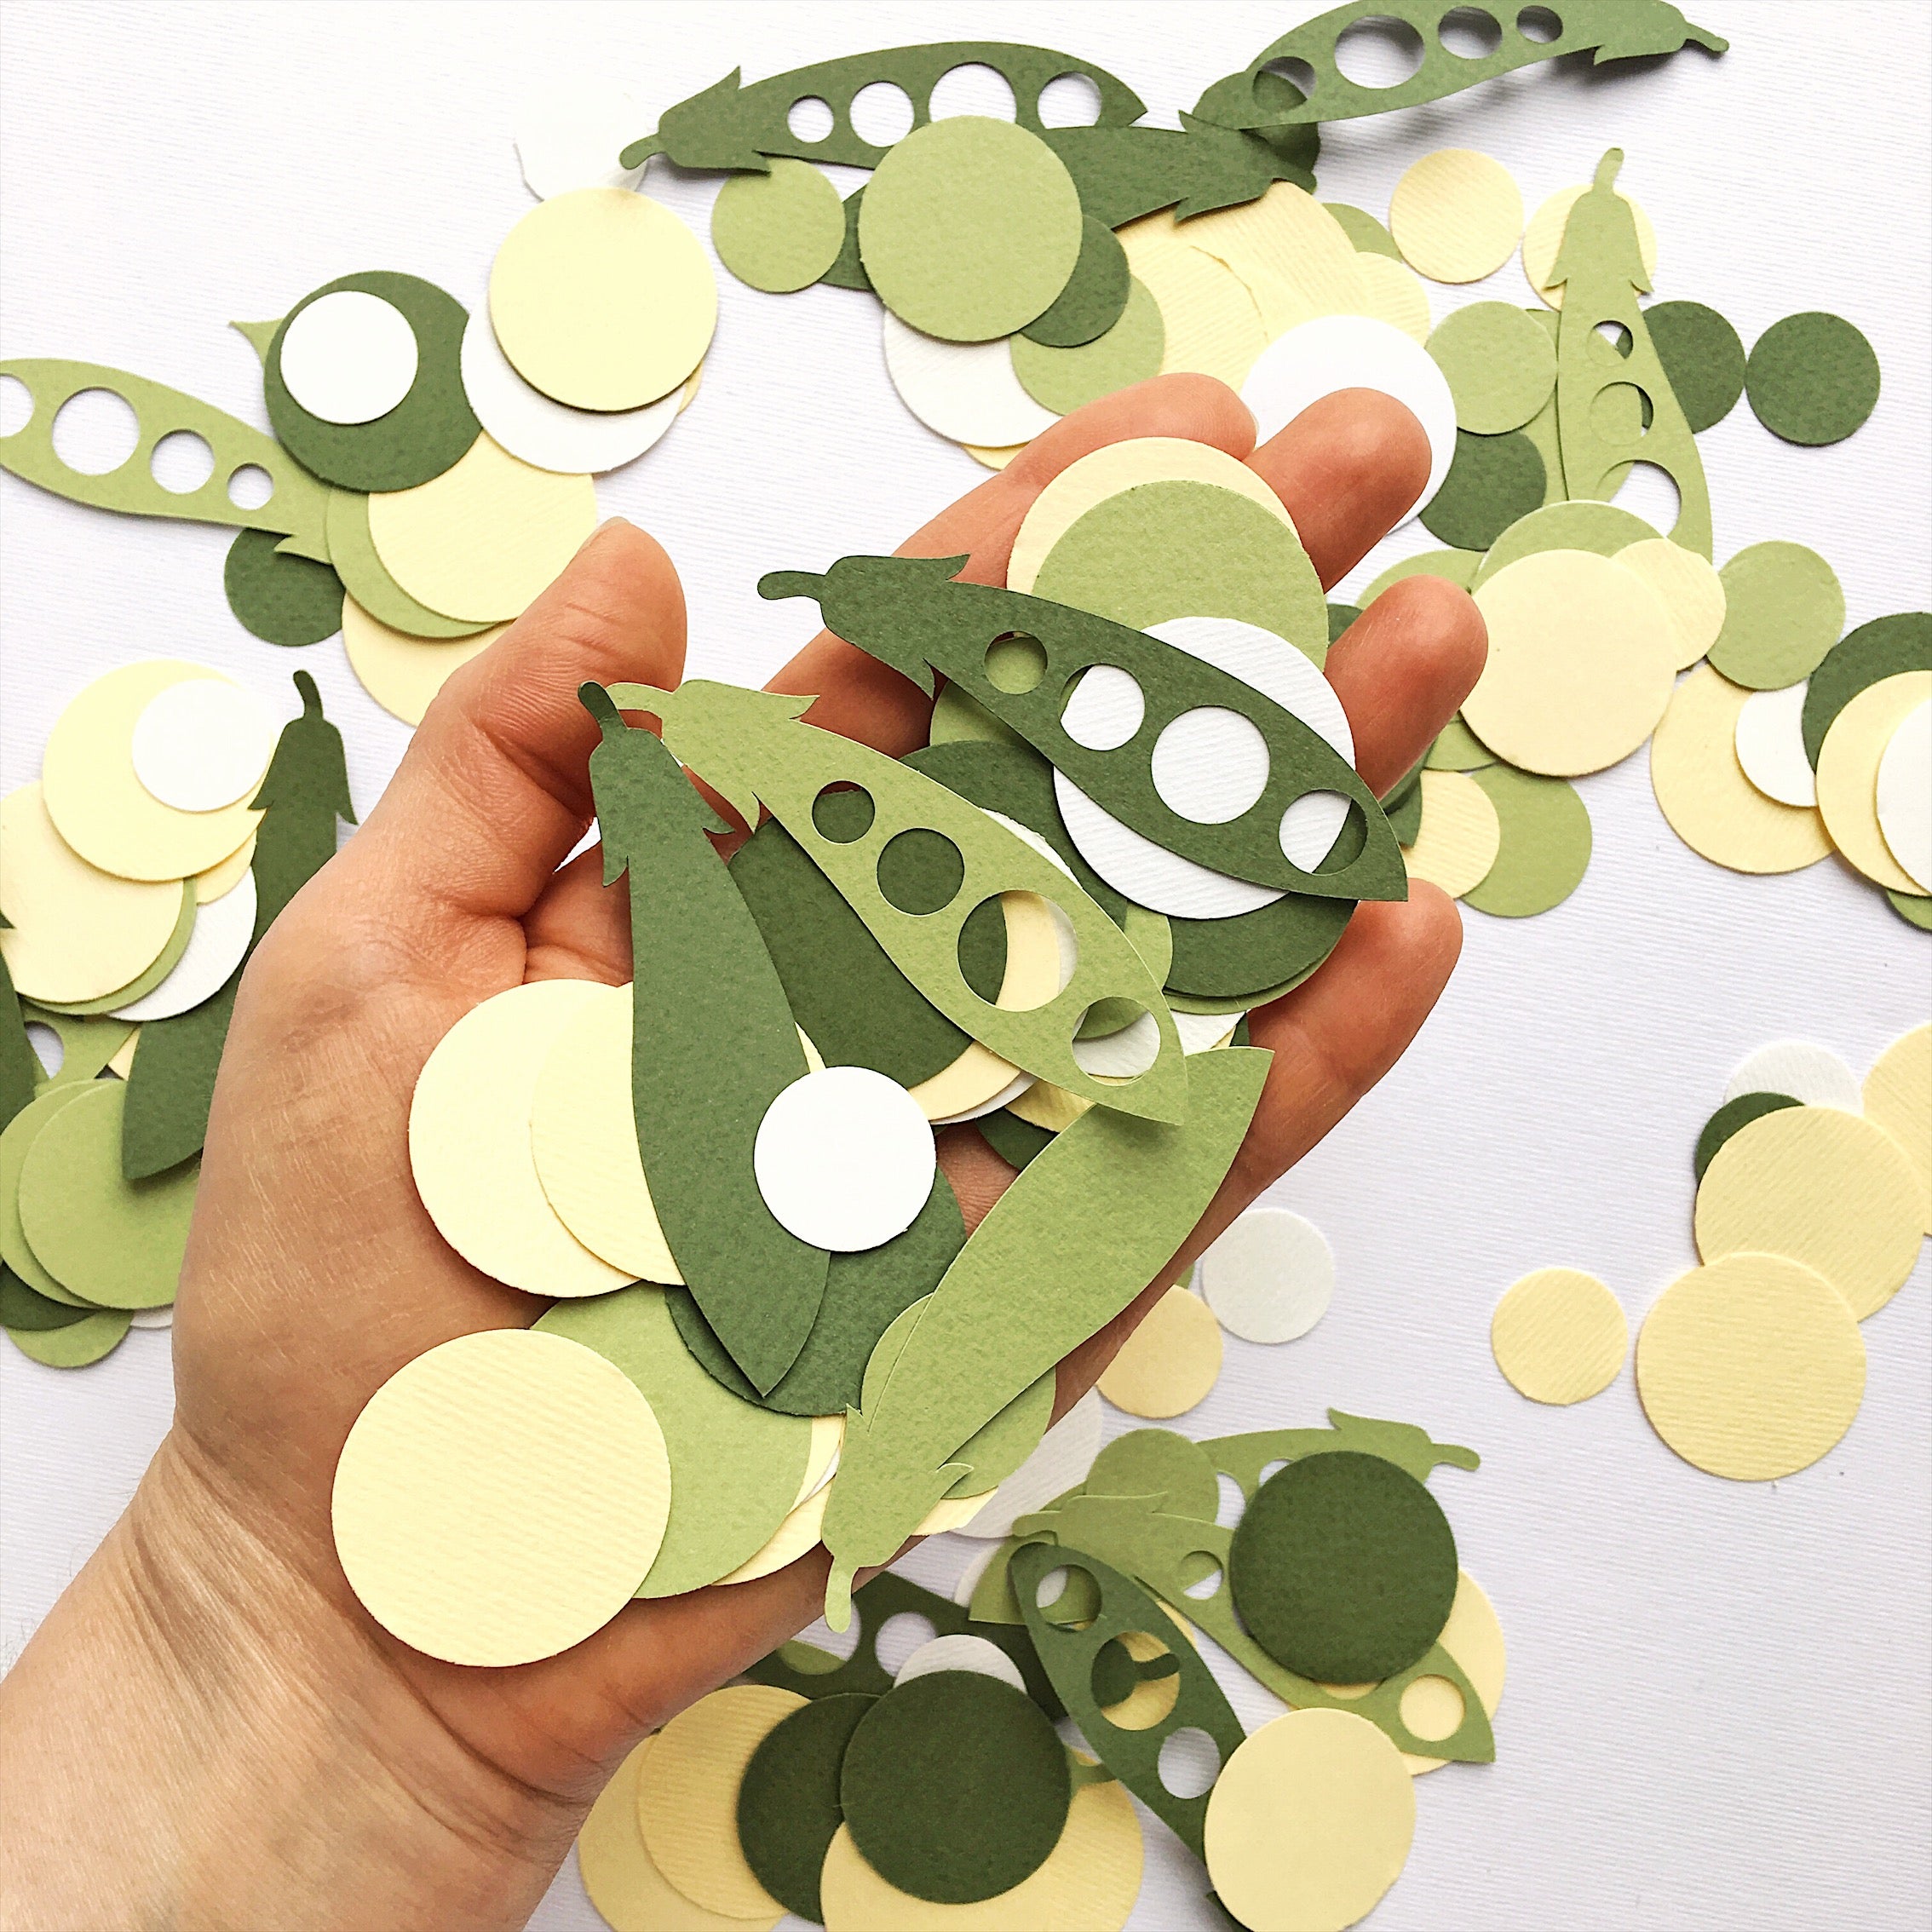 Pea Confetti Sweet Pea First Birthday Pea Baby Shower Decorations Little Sweet Pea in a Pod Birthday Sweet Pea 1st Birthday Twins Two Peas in a Pod